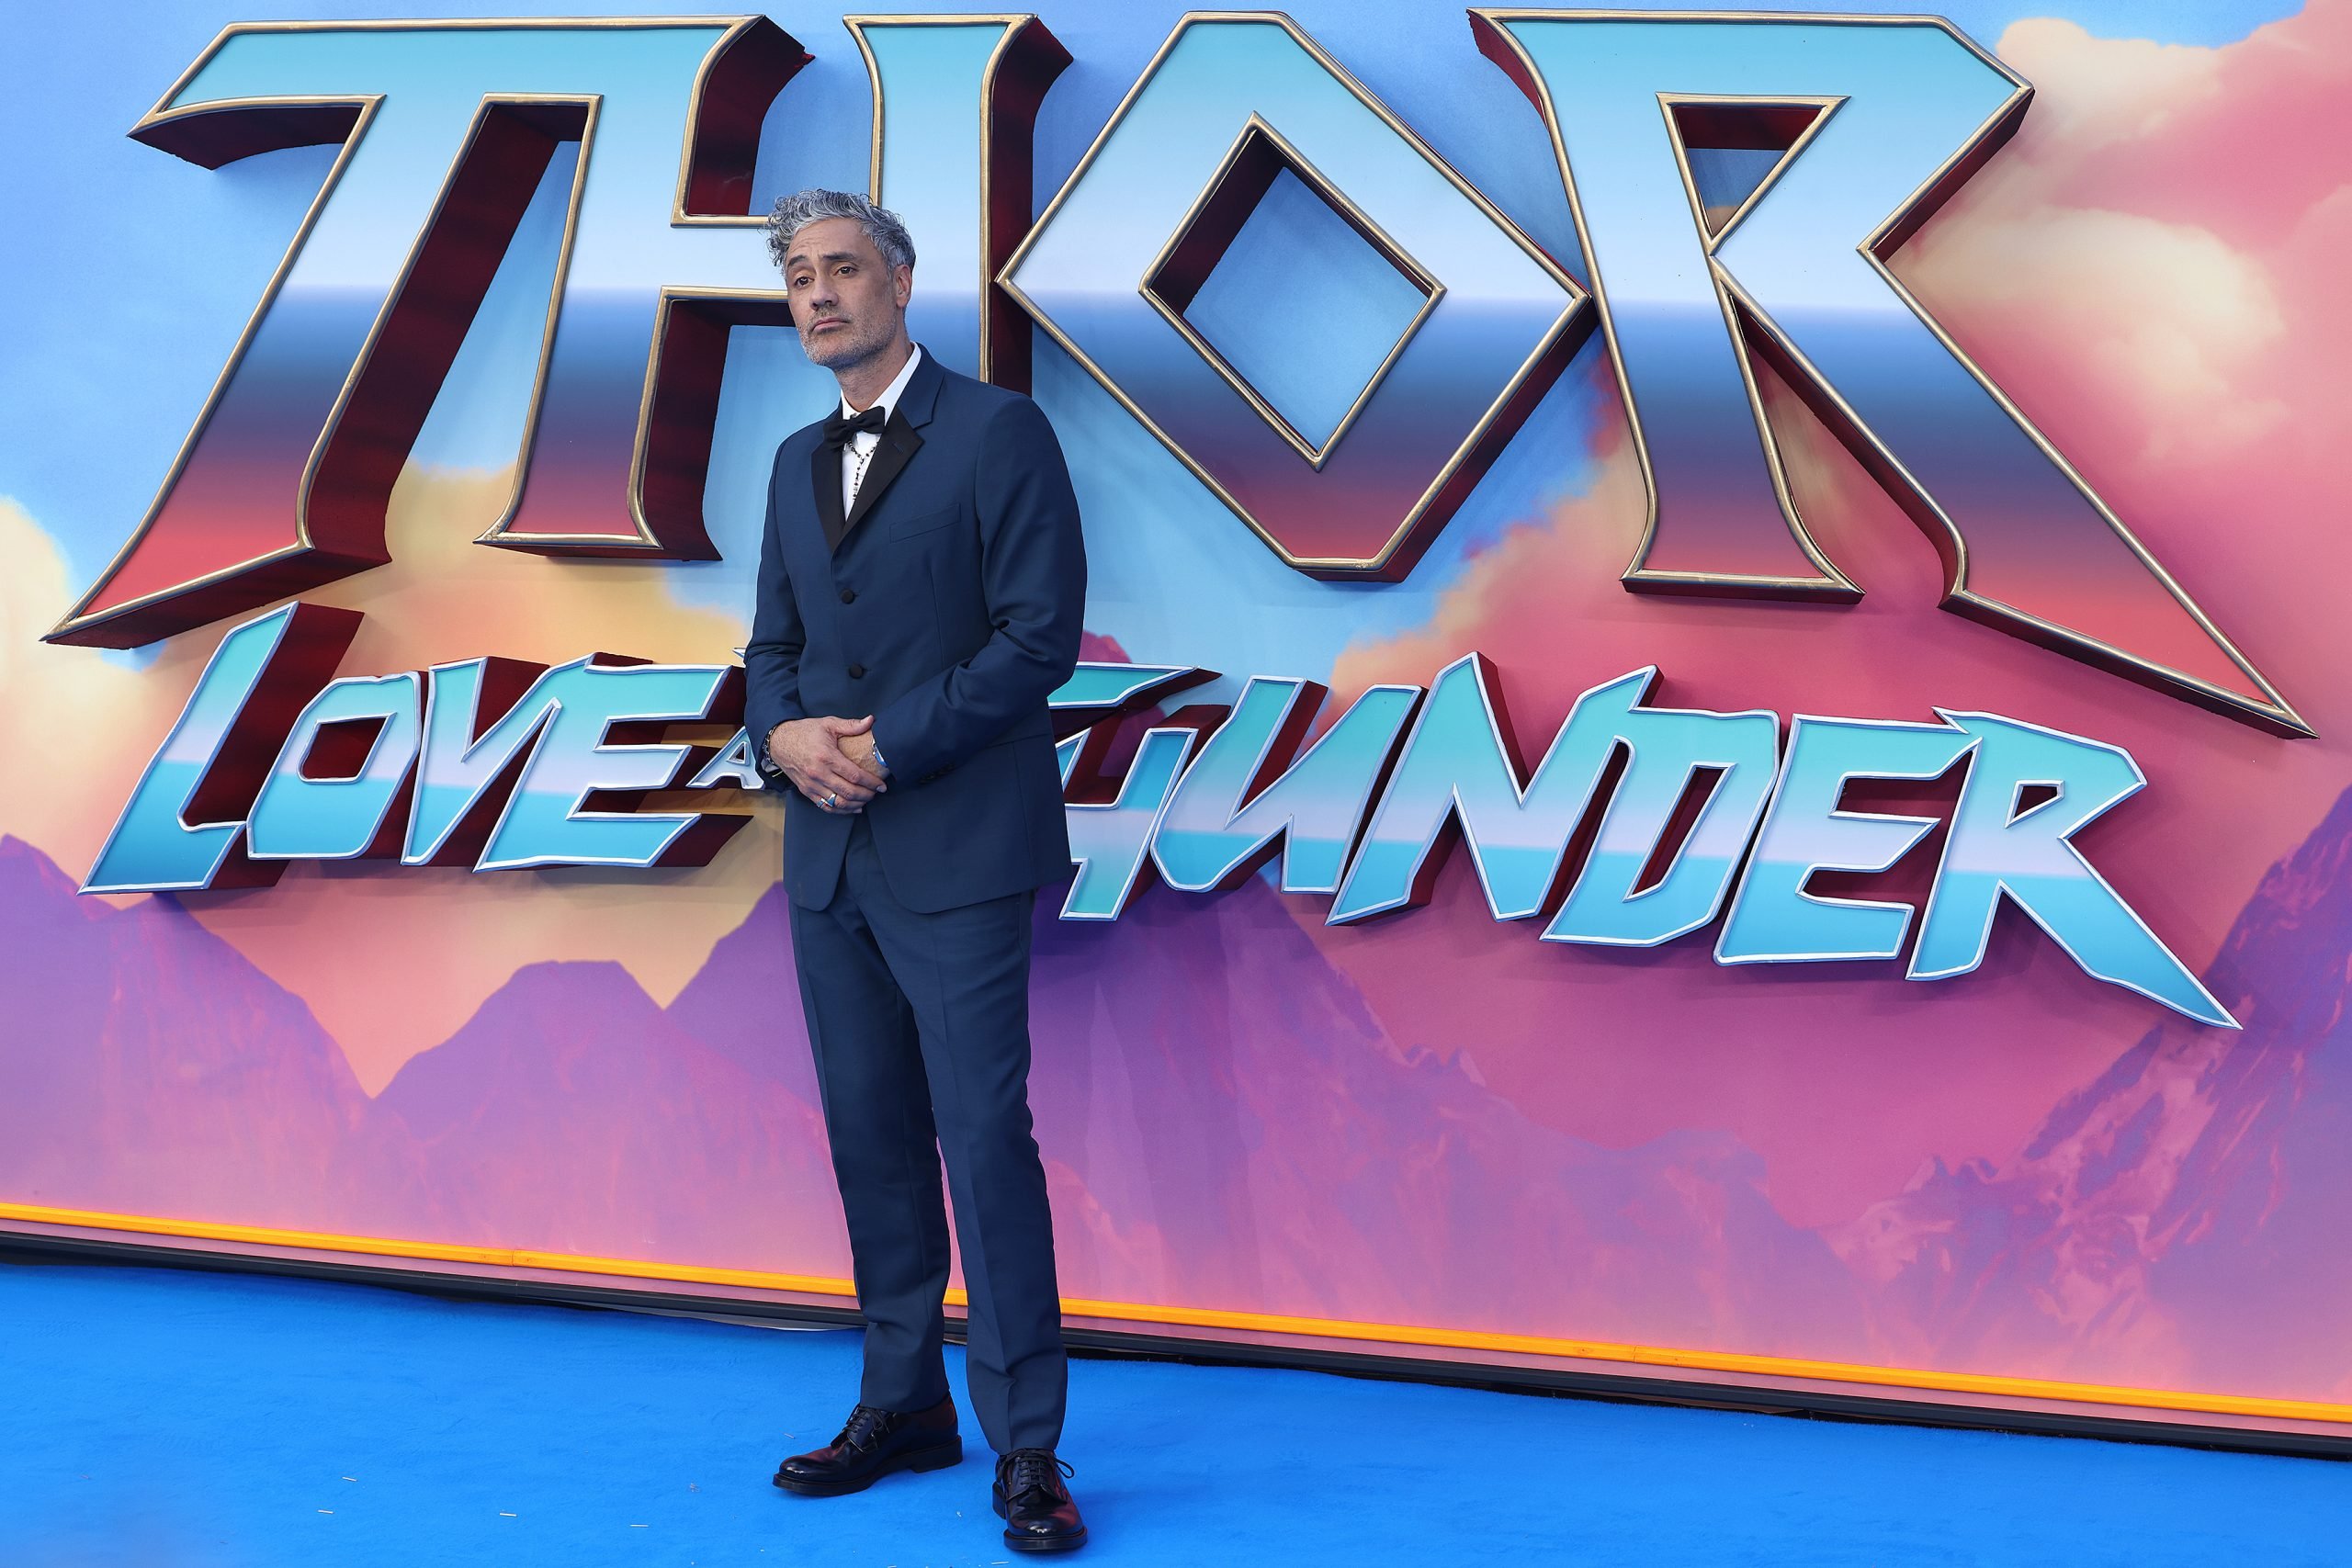 Director Taika Waititi attends the UK gala screening for his movie Thor: Love and Thunder